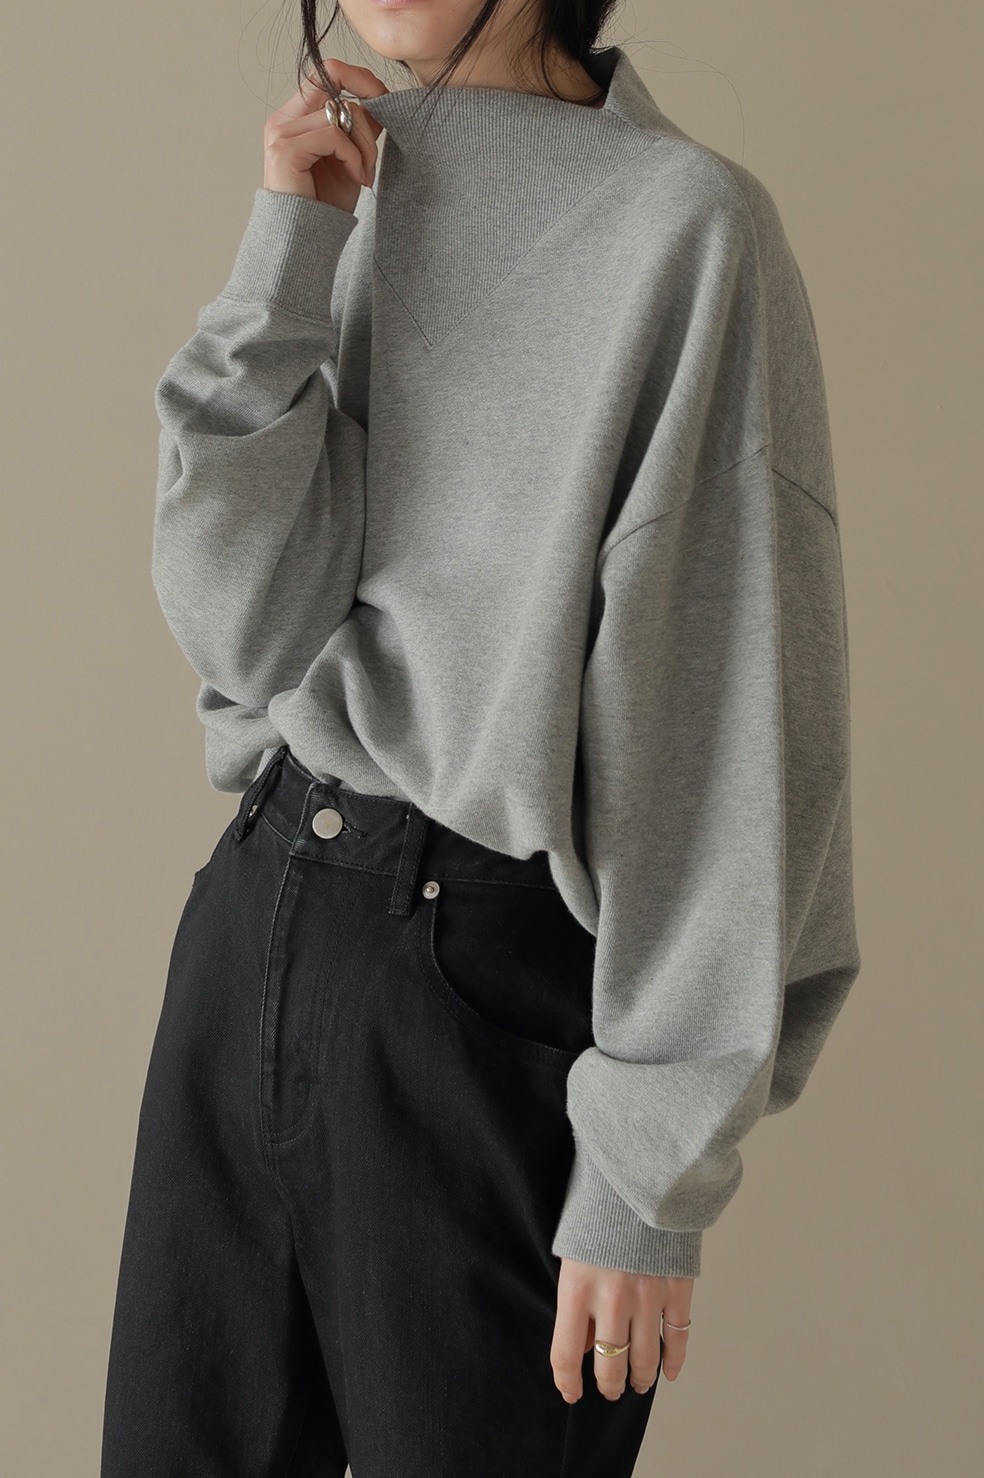 UP NECK SWEAT TOPS｜TOPS(トップス)｜CLANE OFFICIAL ONLINE STORE